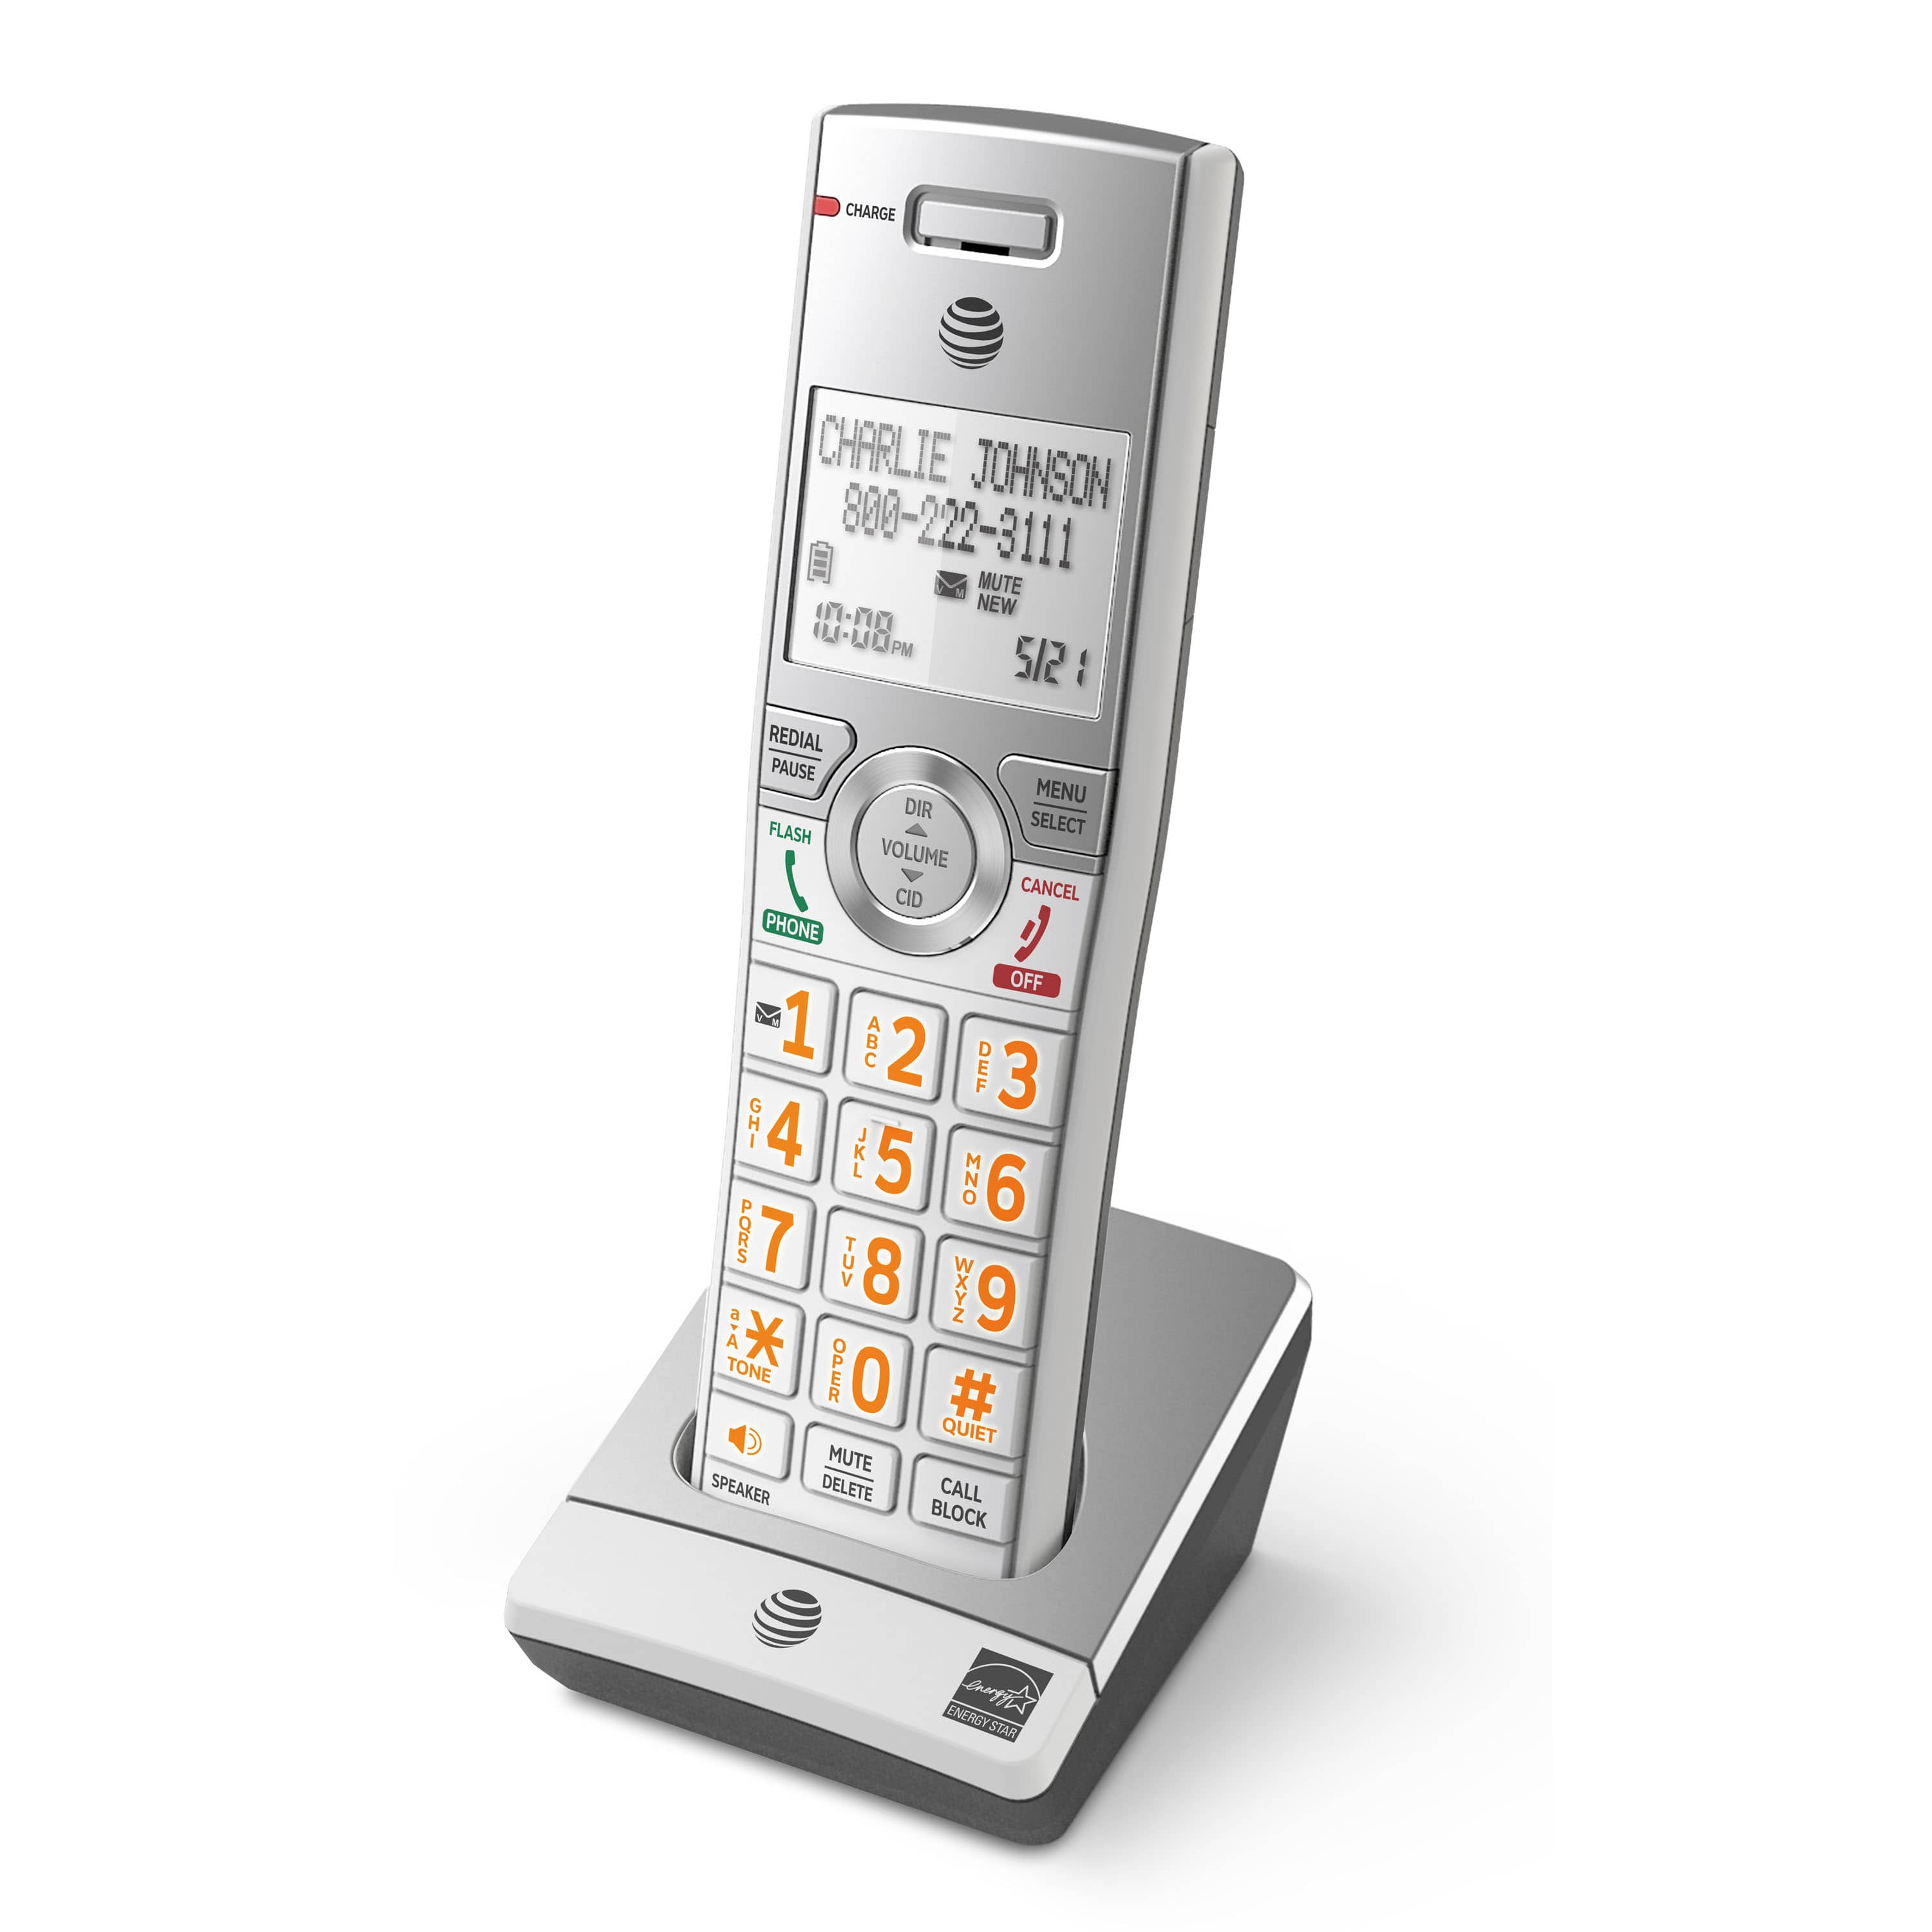 6 handset phone system with smart call blocker - view 6